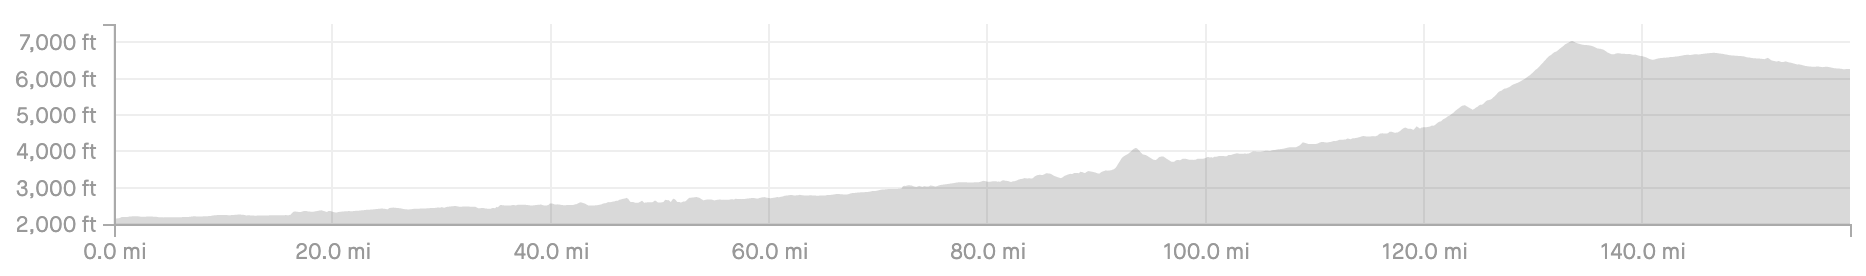 Elevation profile of the long night and day of riding.